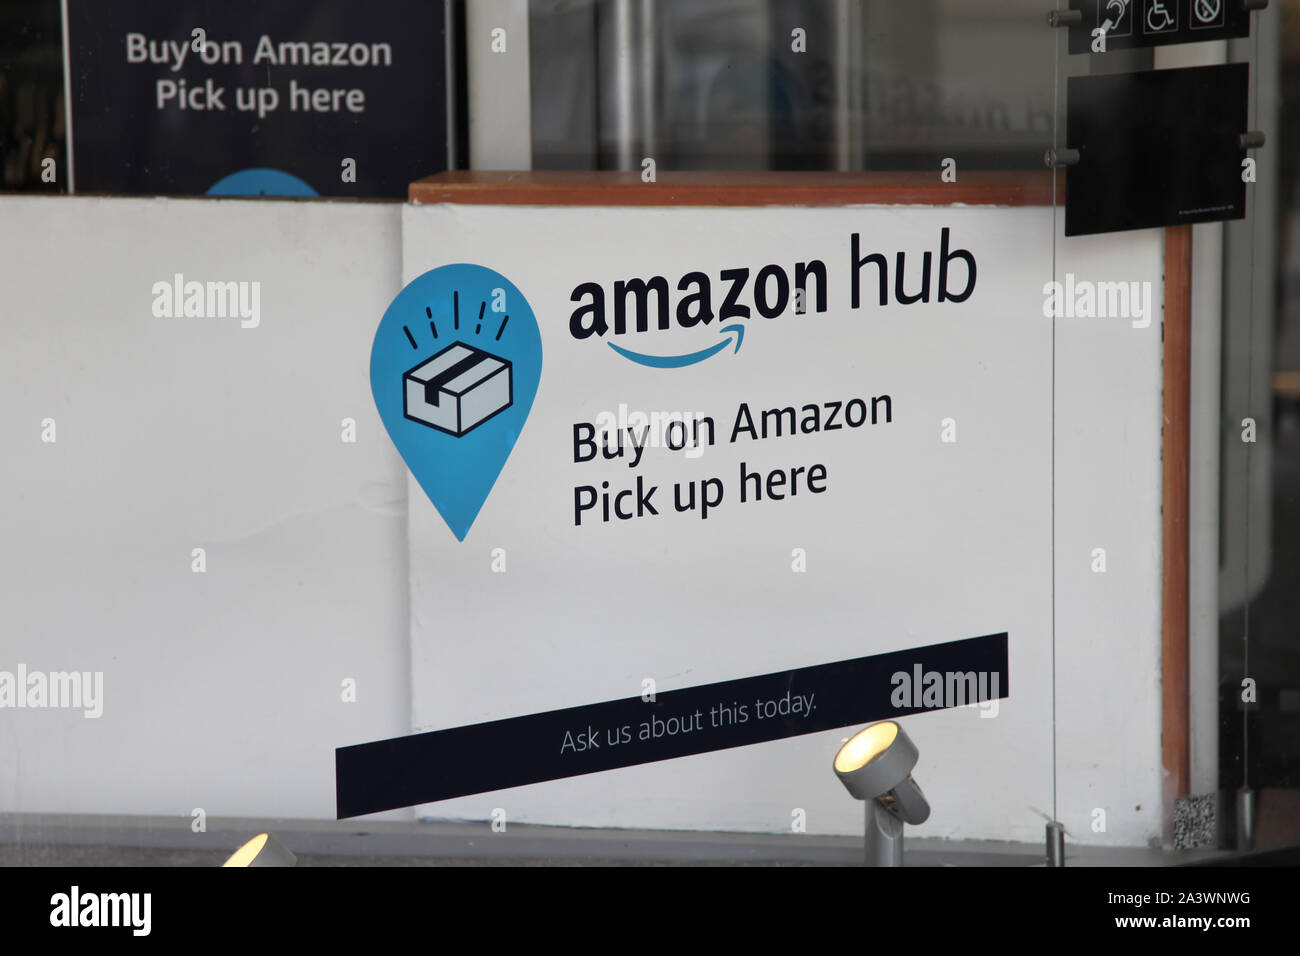 Amazon Hub pick up sign inside a shop window advertising where to pick up your amazon parcels, 2019 Stock Photo